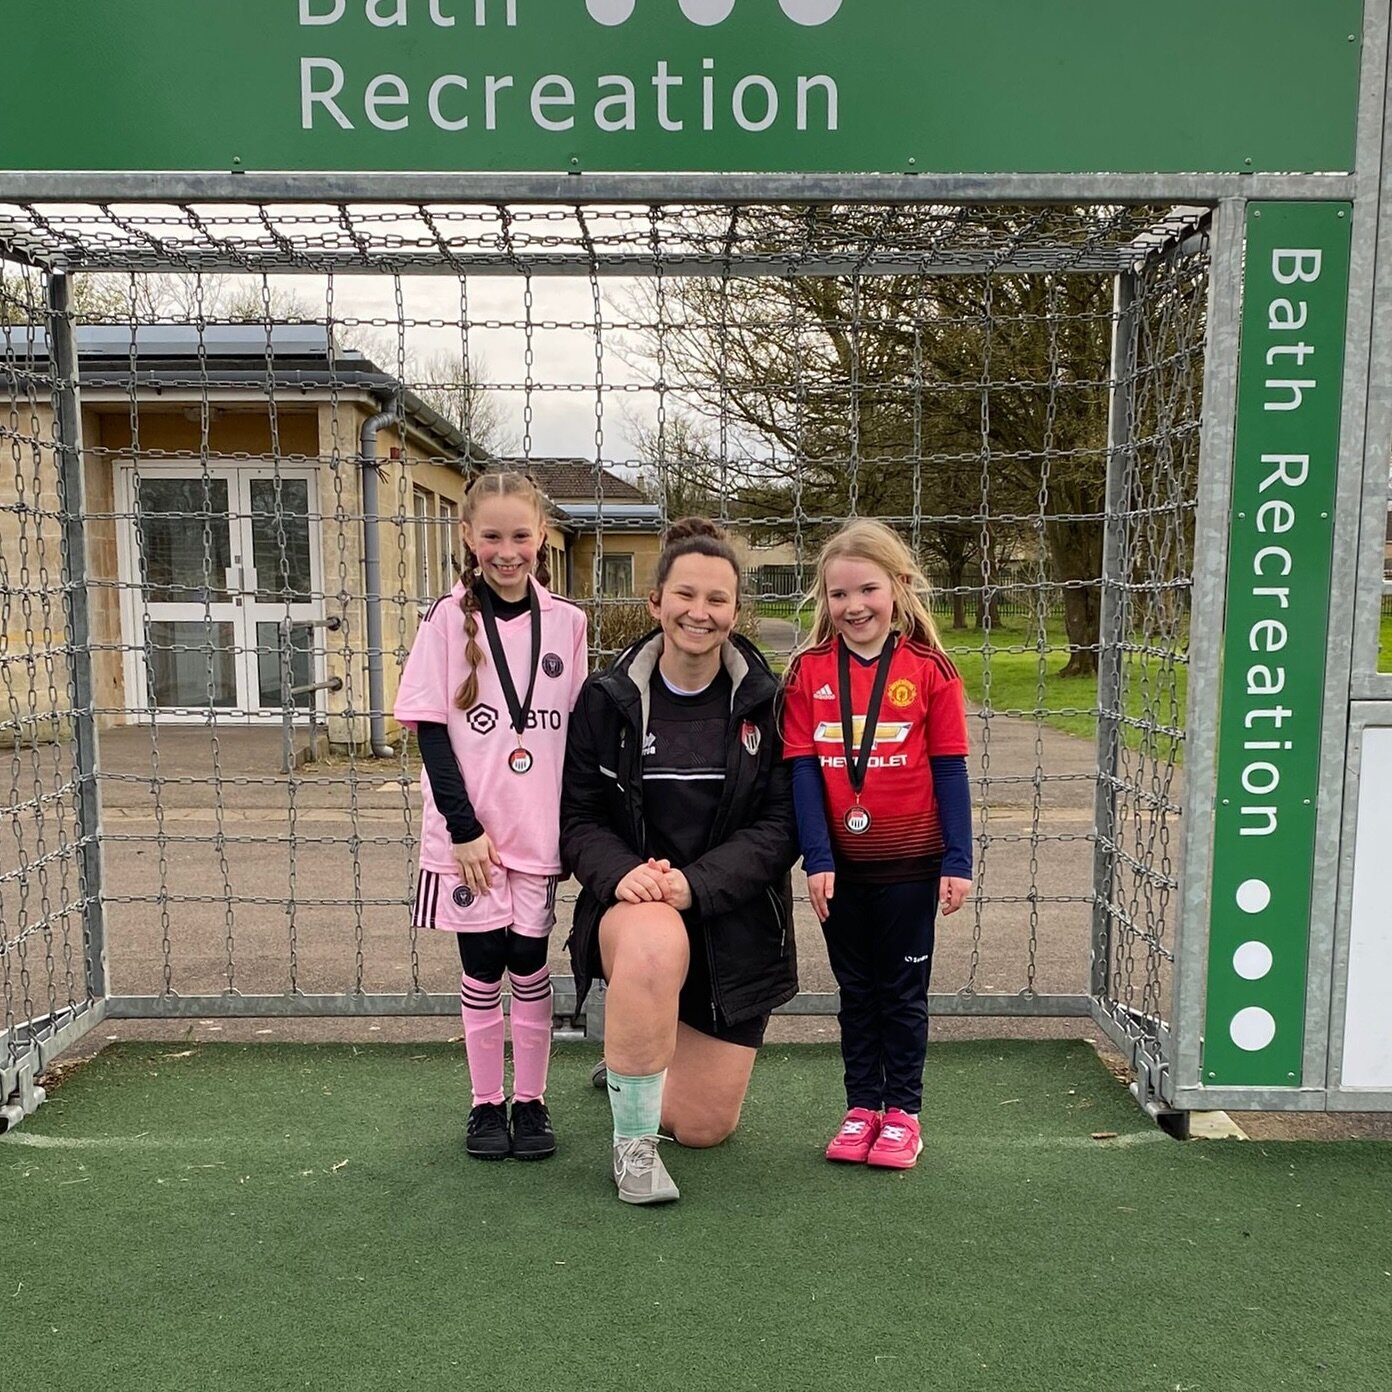 Yesterday&rsquo;s Wild Cats stars of the session, Riley &amp; Isabella. 🌟 

Well done girls! 👏🏻 

#WhoCaresWins